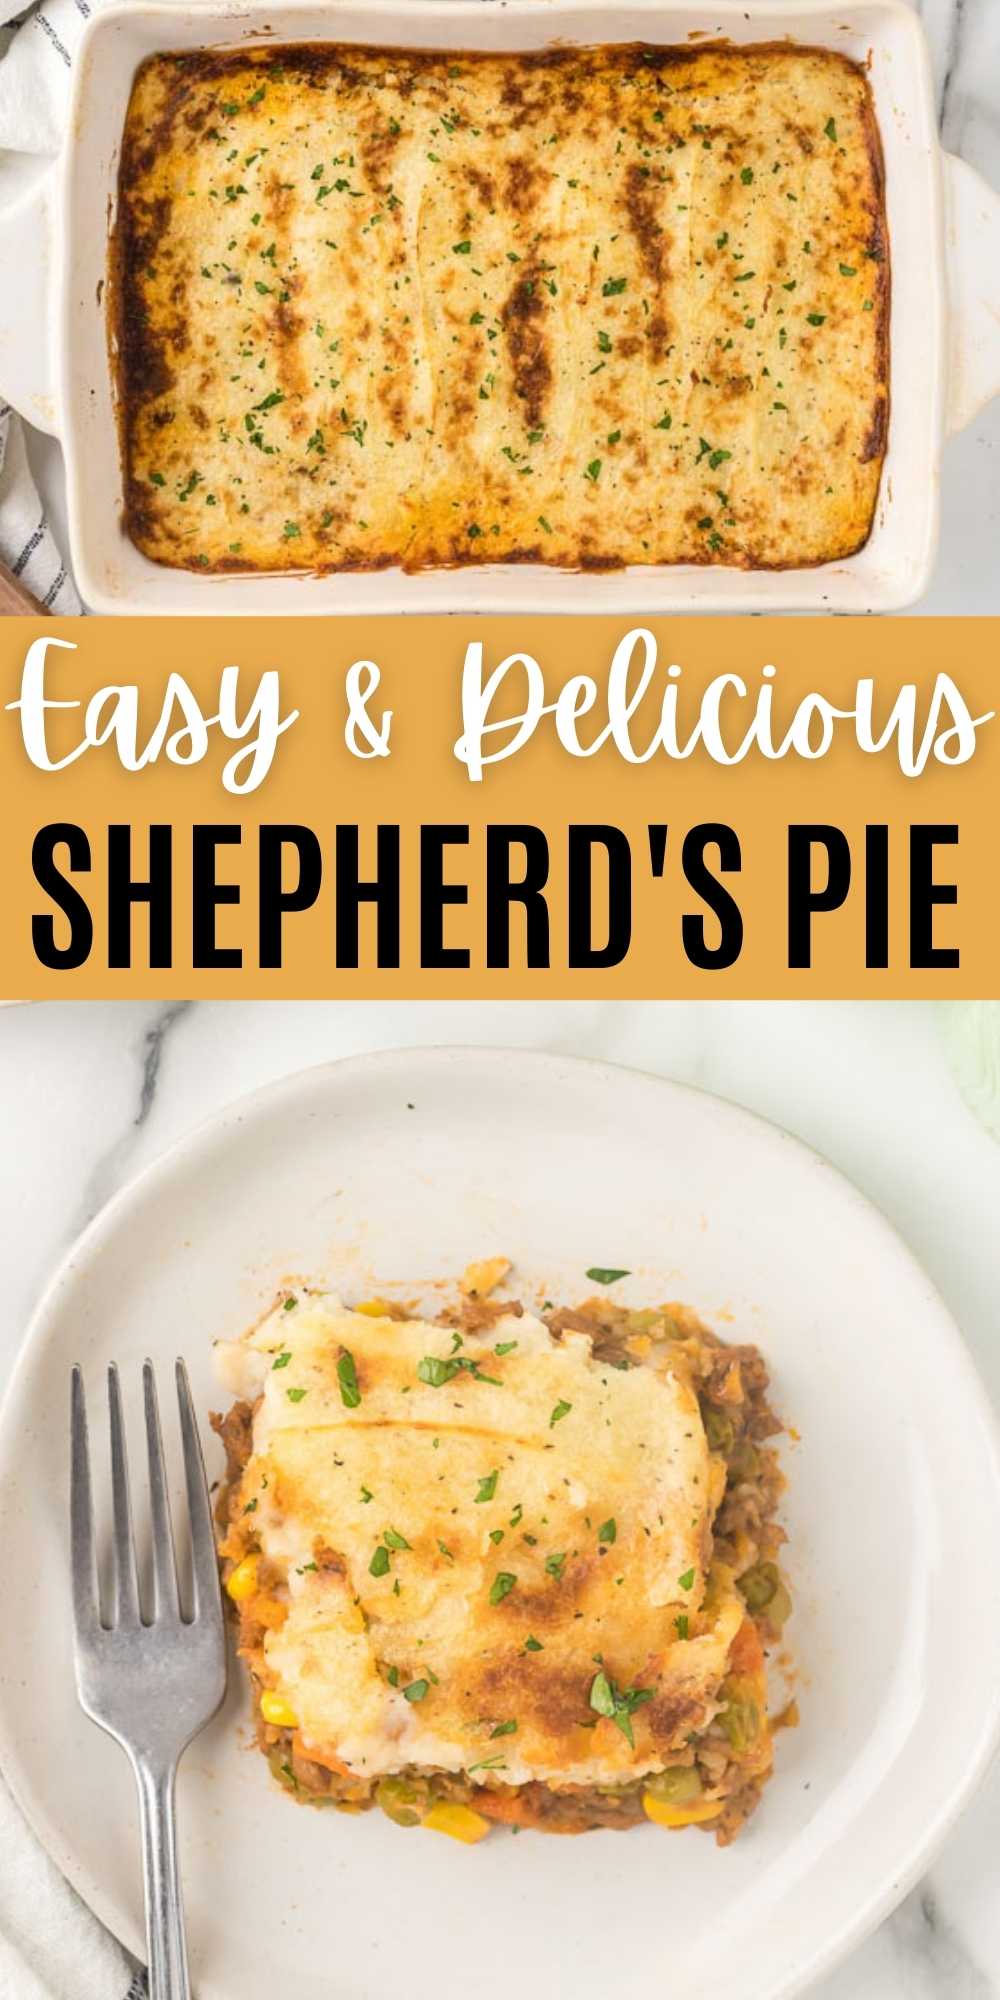 Beef is seasoned to perfection and mixed with mixed veggies and then topped with delicious mashed potatoes to make the best shepherd’s pie recipes.  This easy casserole recipe is simple to throw together and is a delicious hearty recipe that they entire family will love! #eatingonadime #casserolerecipes #beefrecipes #sheperdspie 